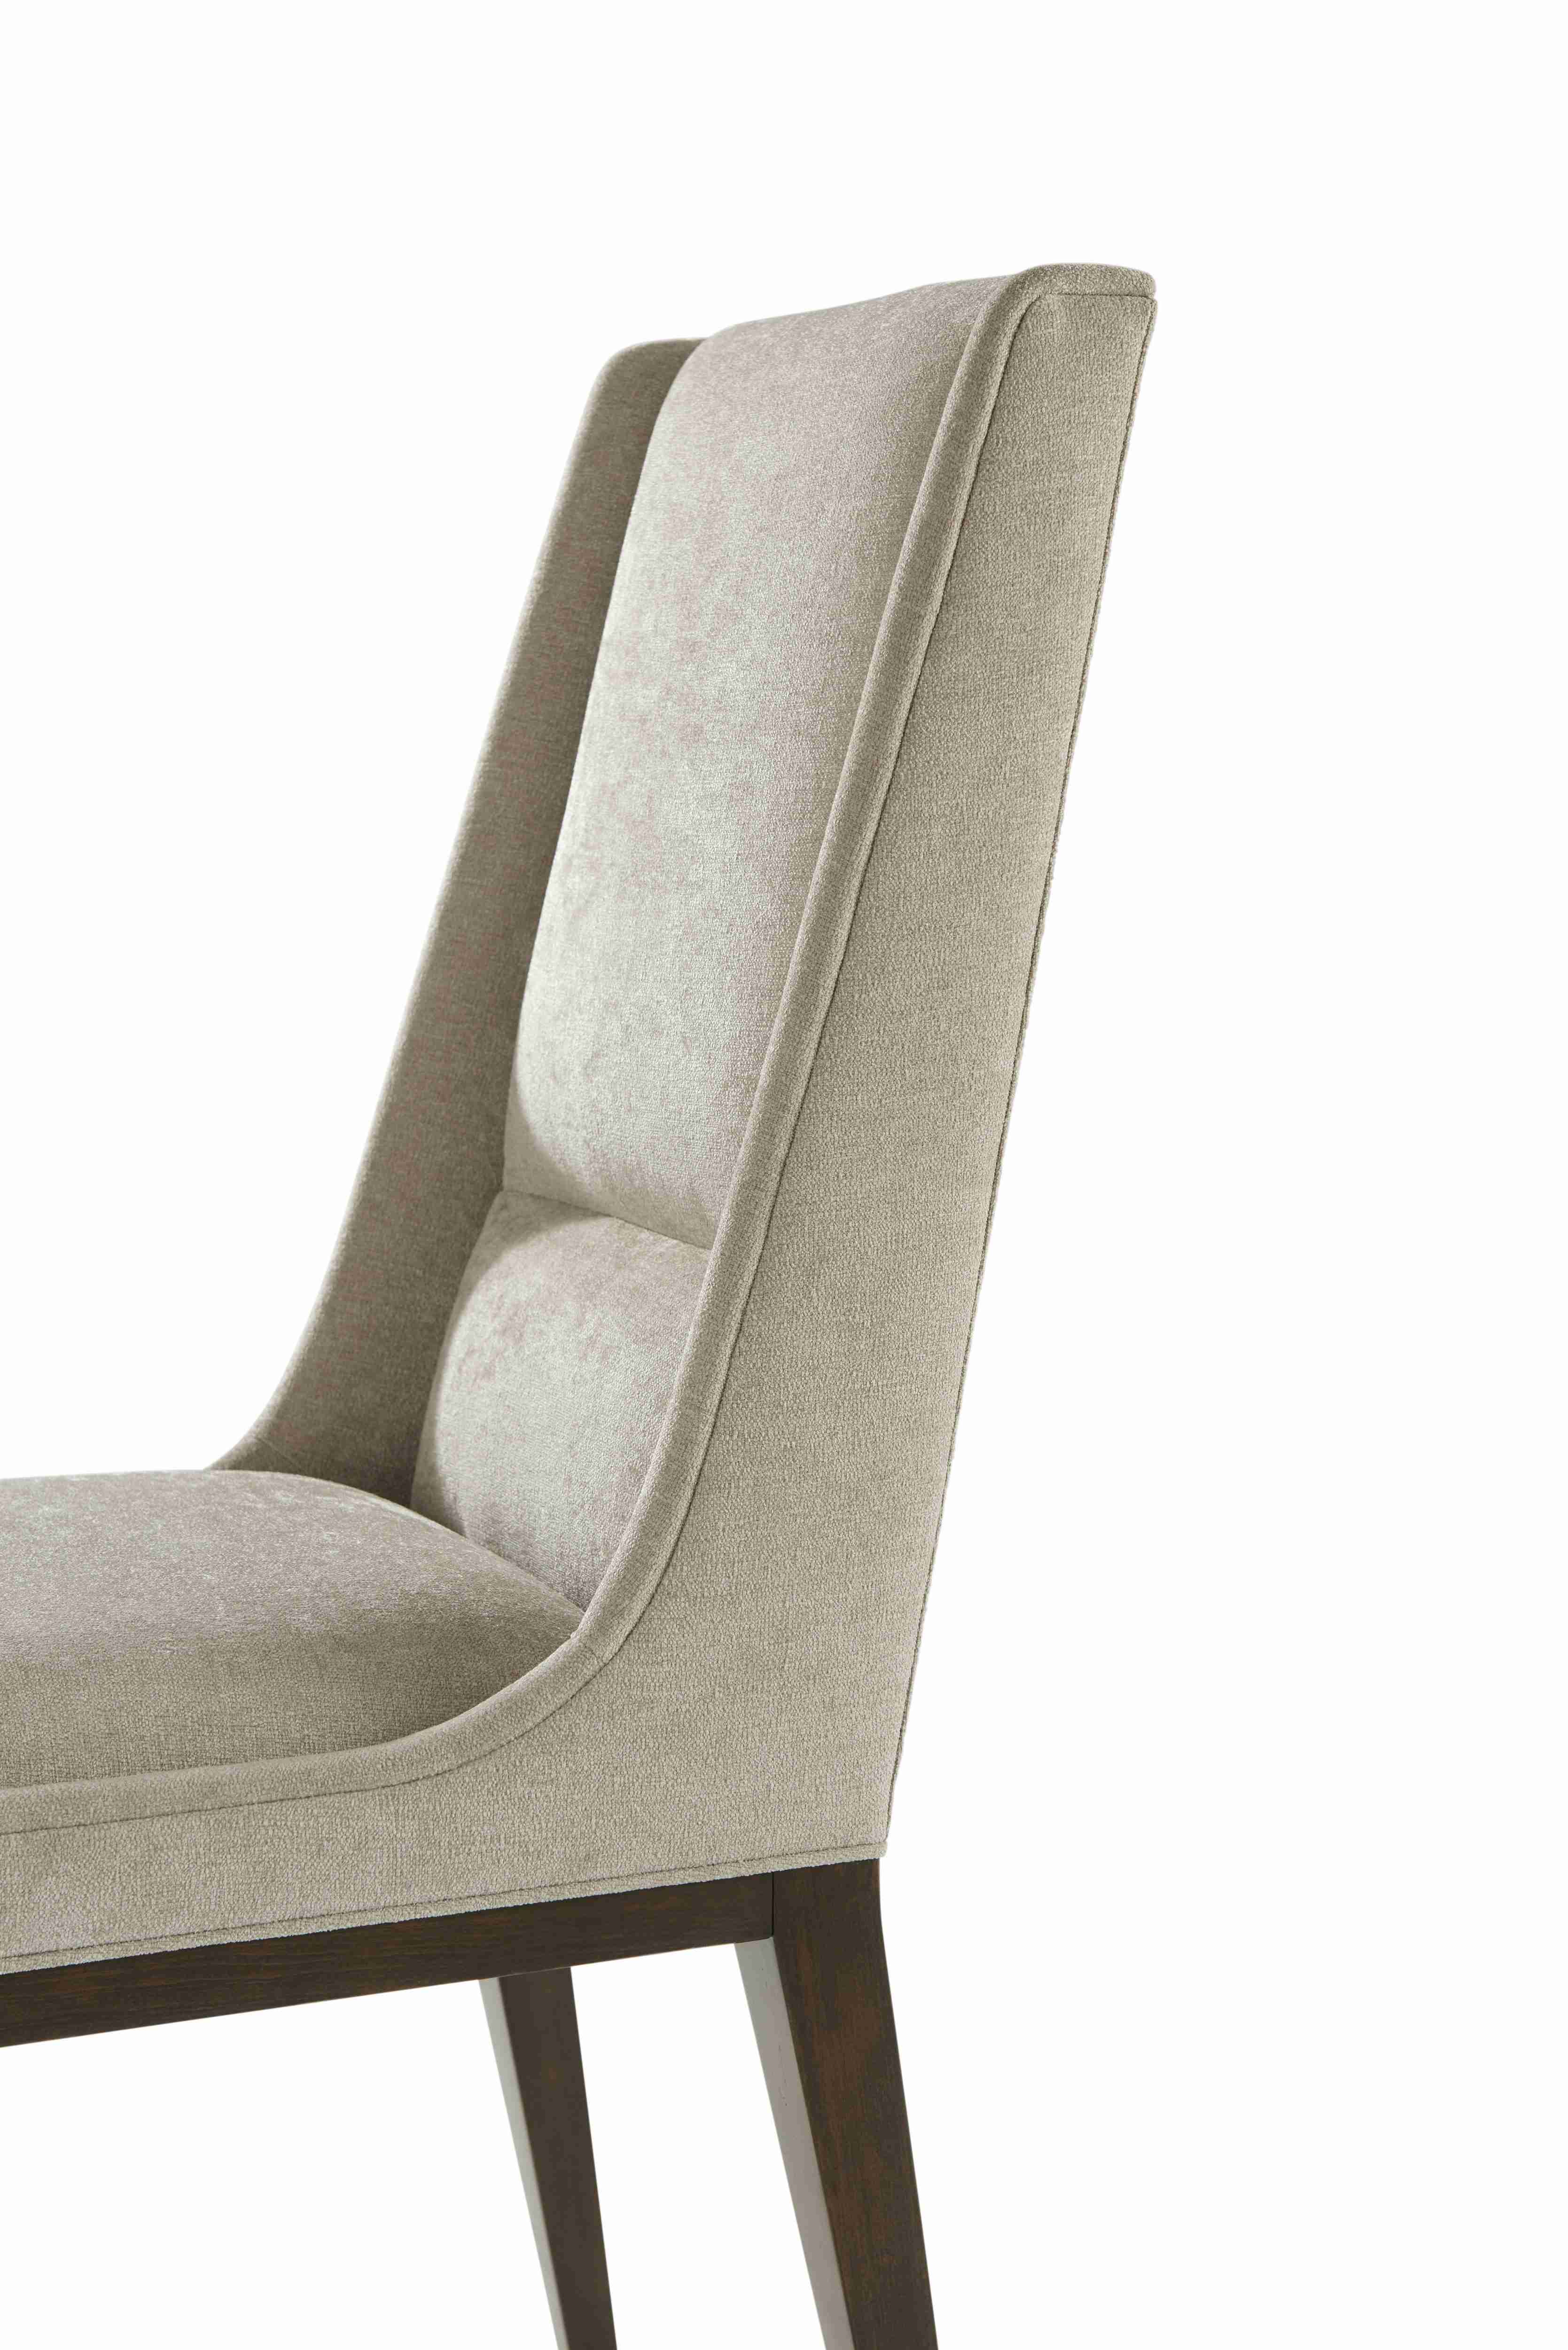 LIDO UPHOLSTERED DINING SIDE CHAIR